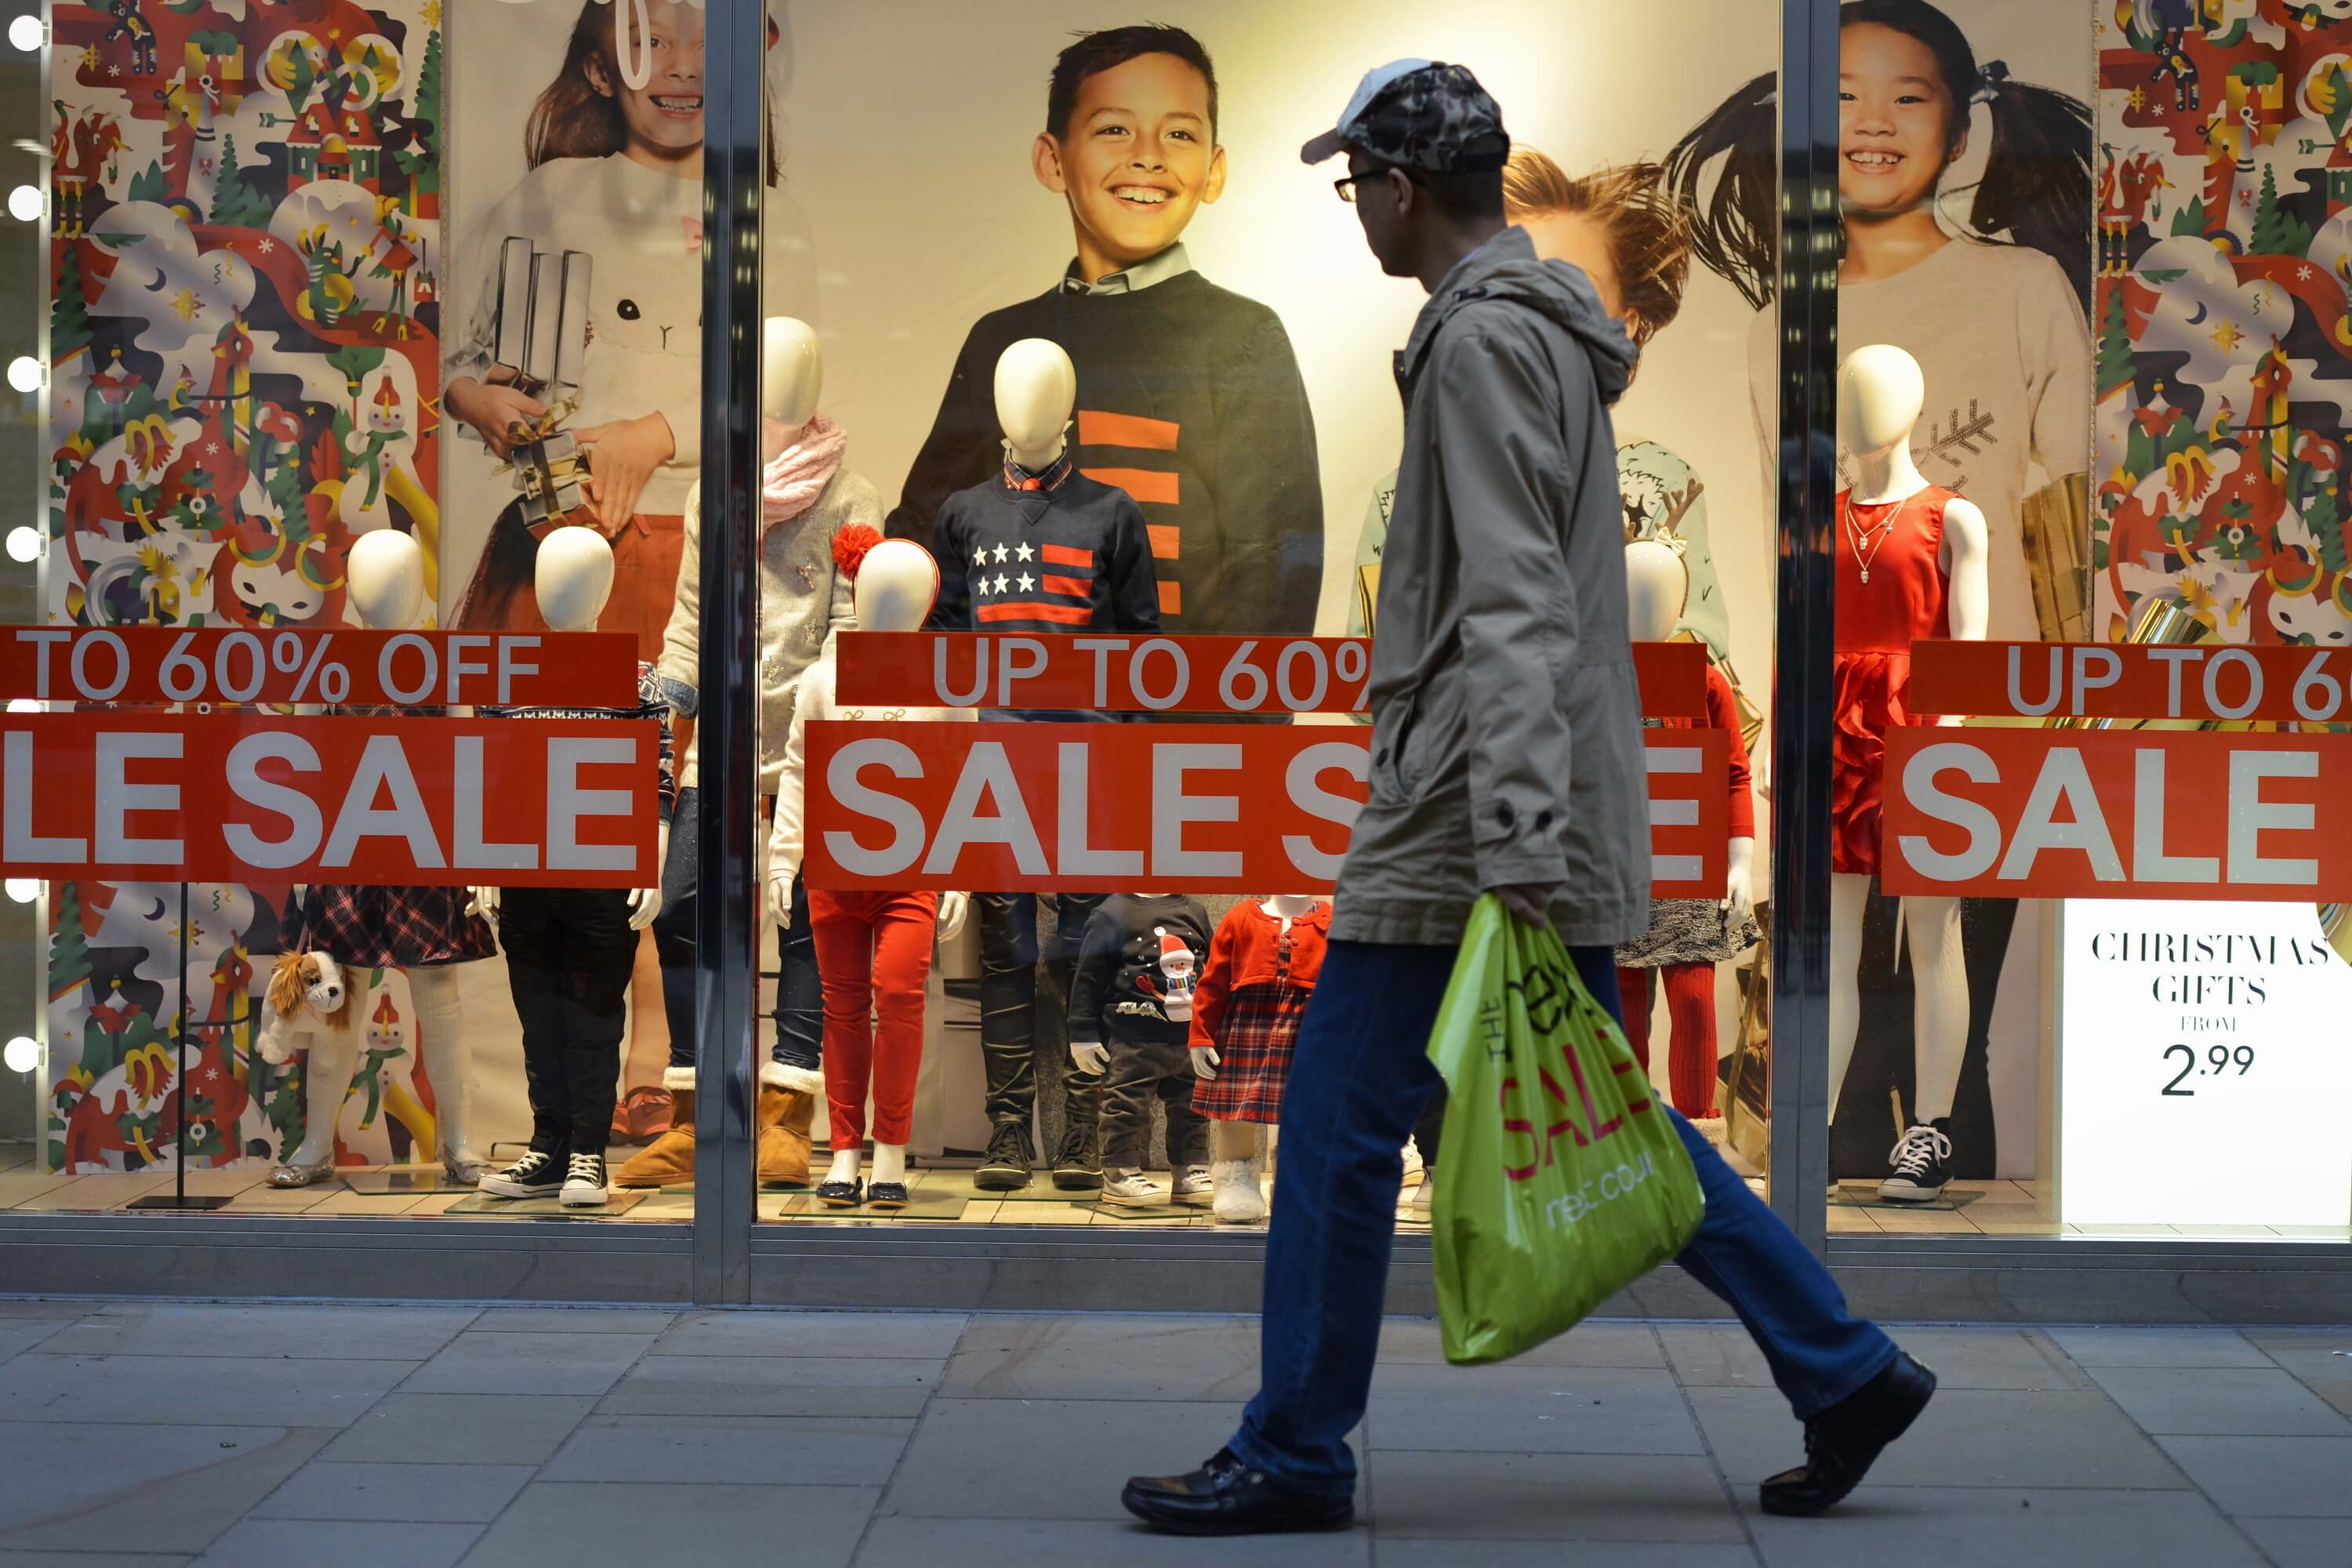 Will the holiday sales season be the event it's hoped to be?